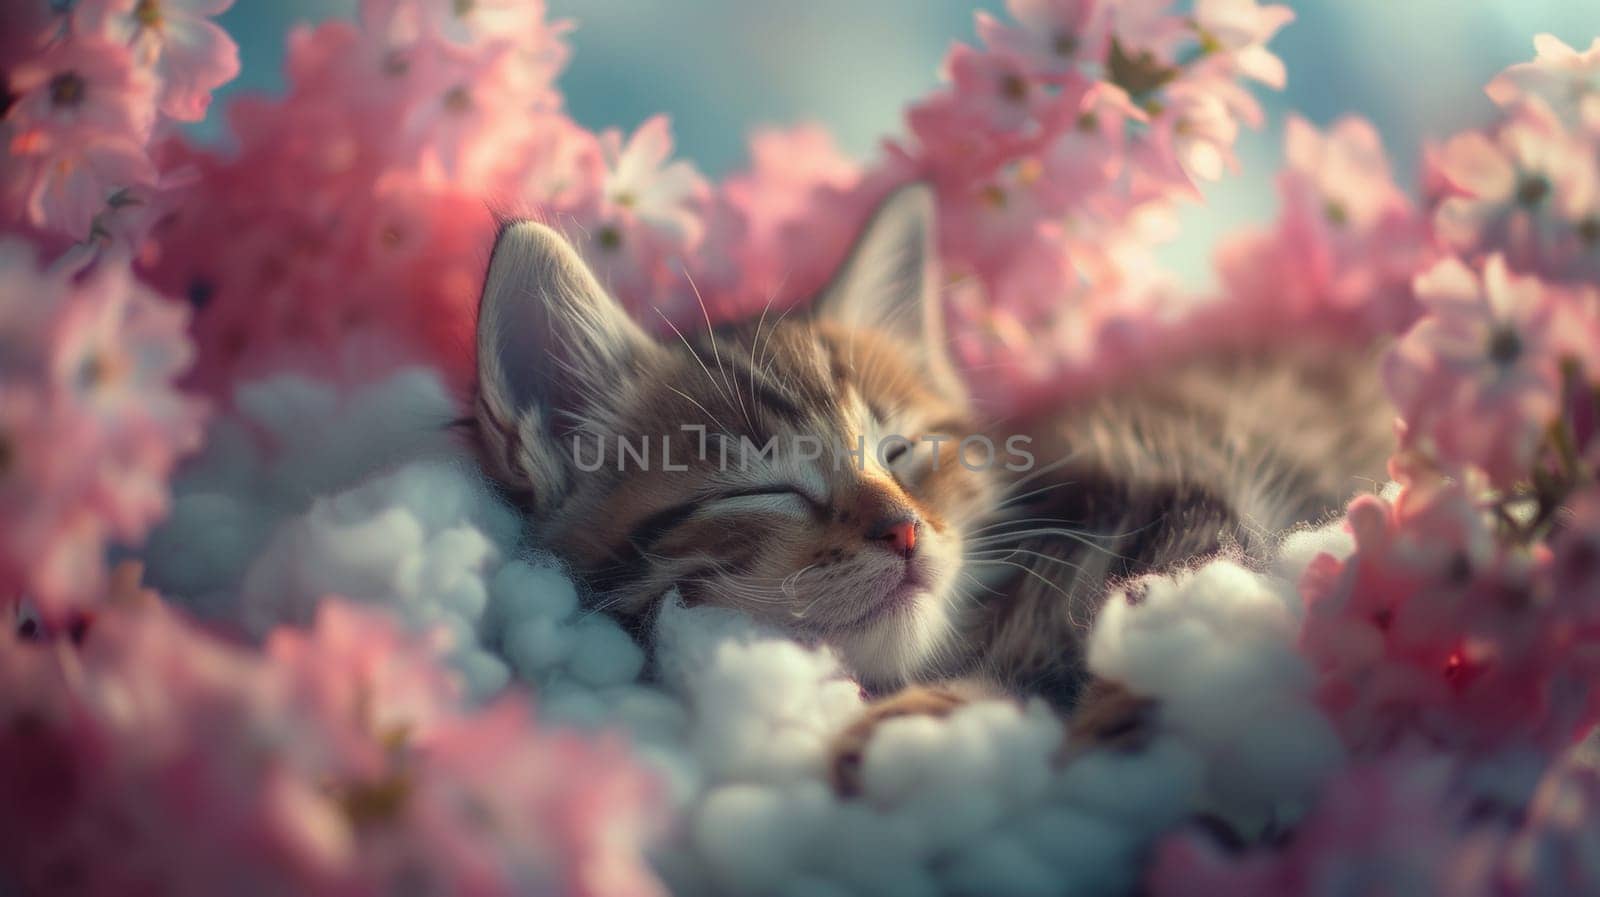 A cat sleeping in a field of flowers with pink petals, AI by starush